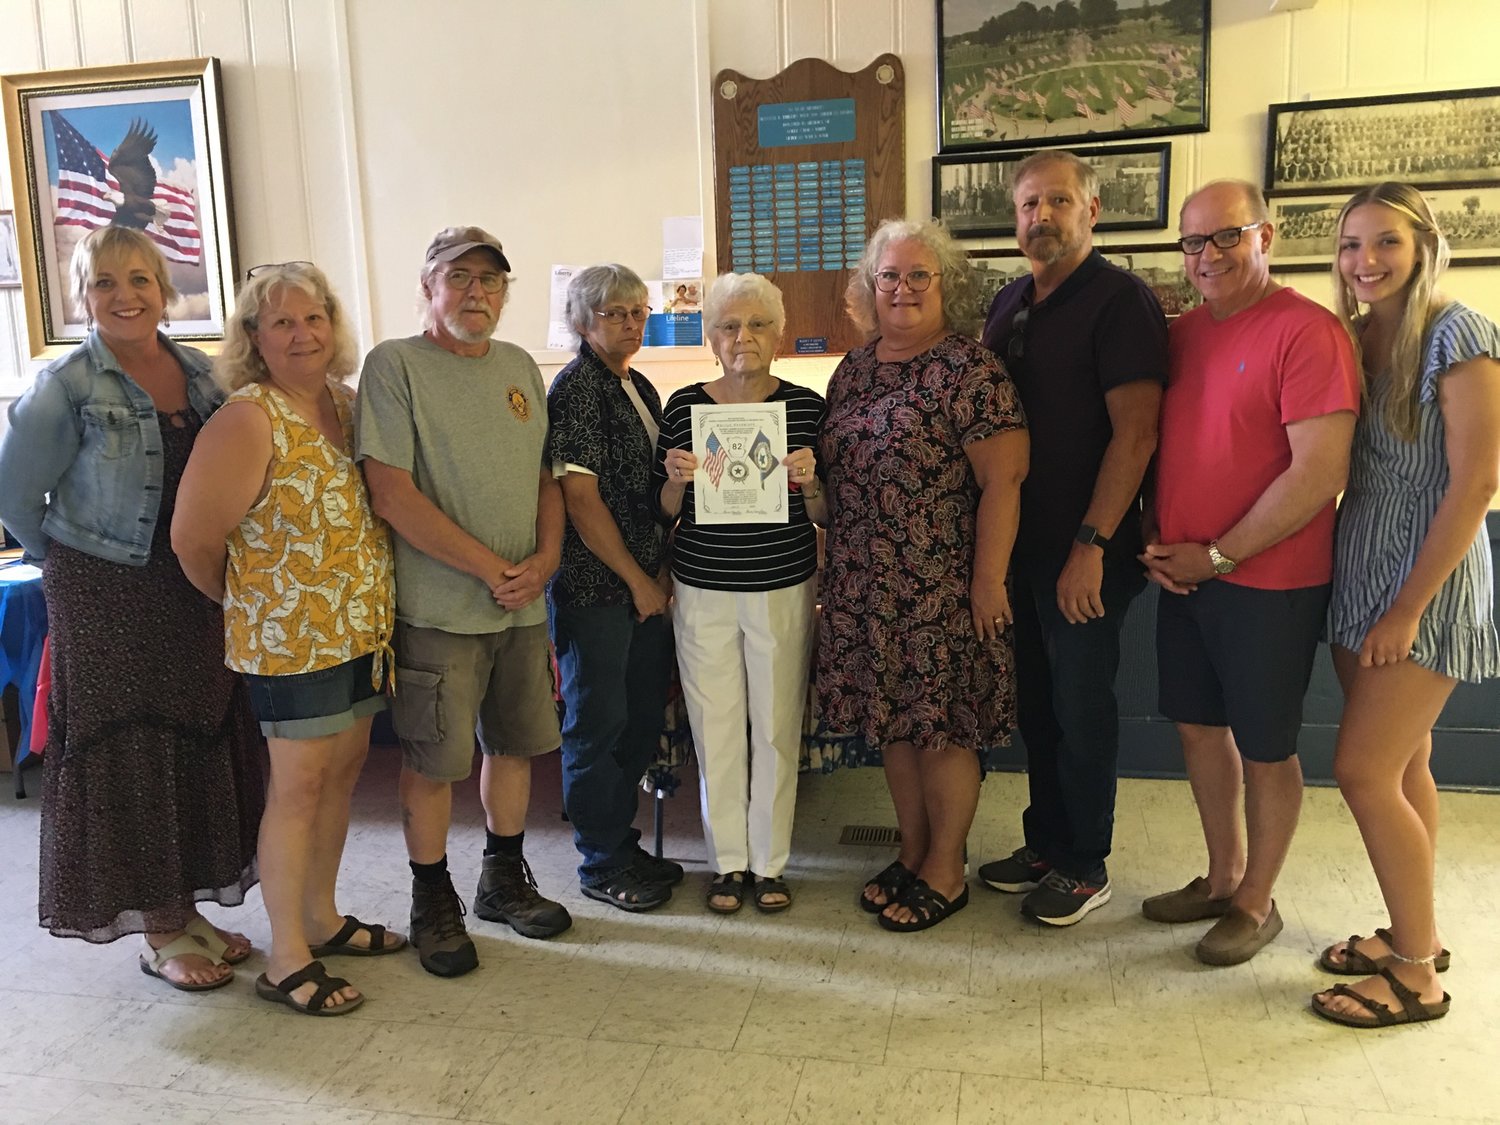 Jackie Henderson, Annette Henderson, Jeff Henderson, Dee Goldsberry, Marilyn Henderson, Melody Henderson, Mark Henderson, Scott Henderson and Mylei Henderson attended the 100th anniversary of the West Liberty Mansell Phillips Unit #509 American Legion Auxiliary on Sunday, June 12. Marilyn was presented a certificate for her 82 years of membership in the auxiliary. Her family members honored her with their attendance that day.